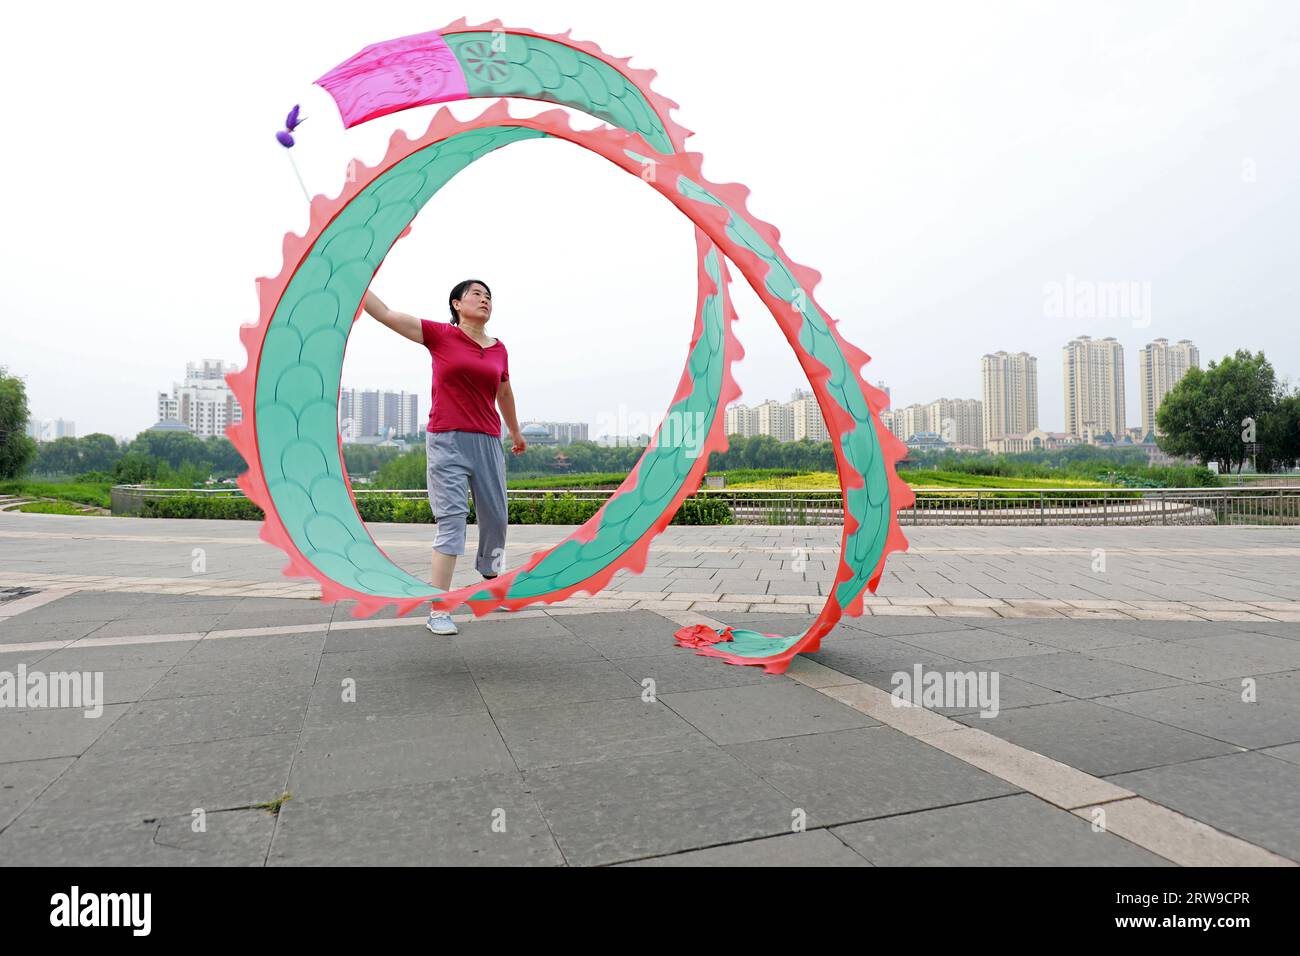 LUANNAN COUNTY, Hebei Province, China - August 6, 2019: People are dancing colorful silk and exercising in the park square. Stock Photo